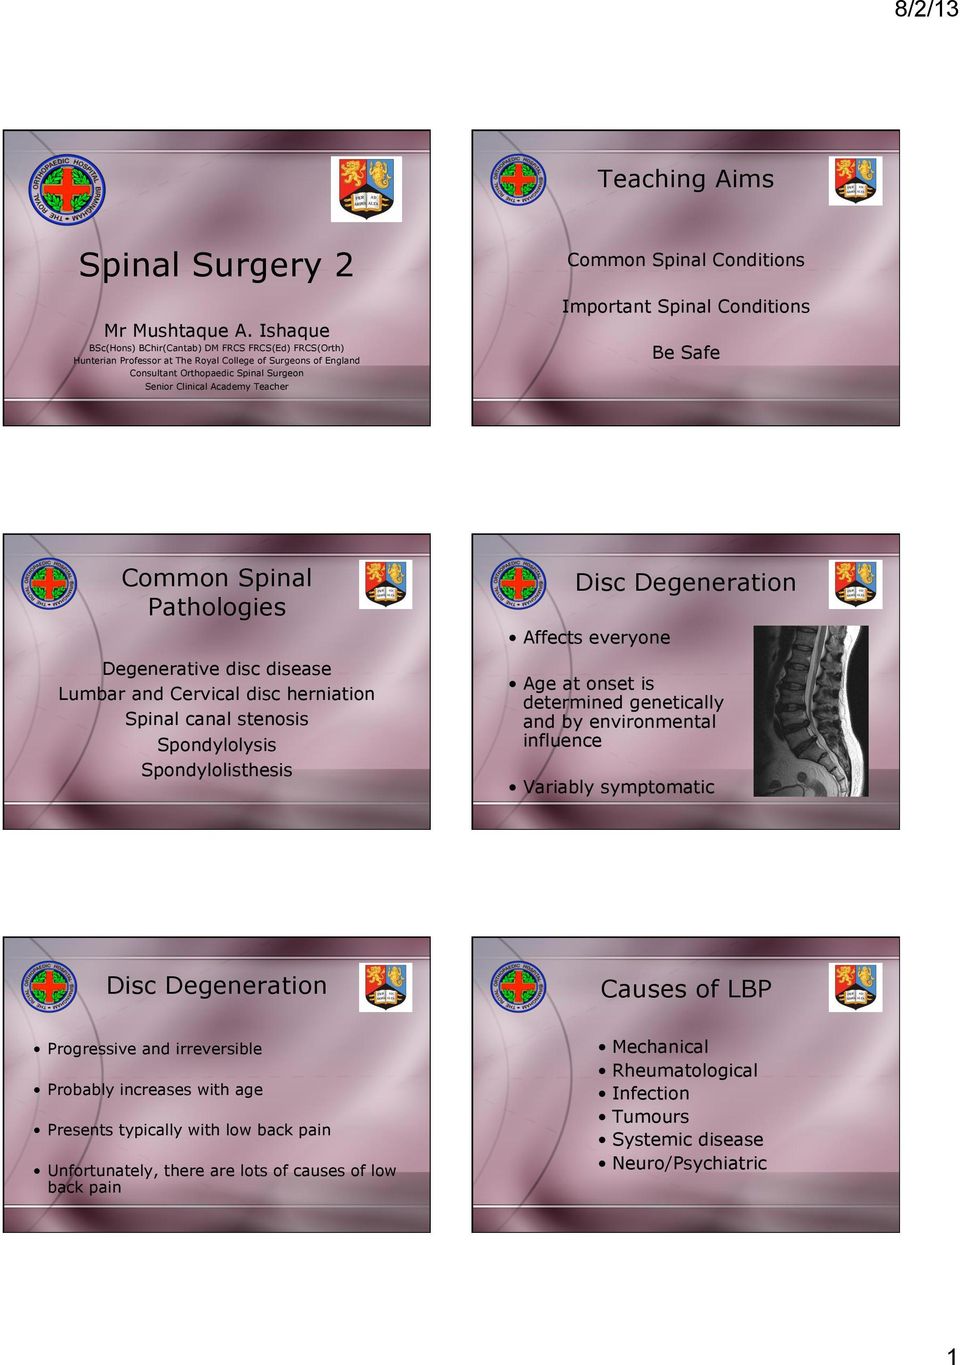 Common Spinal Conditions Important Spinal Conditions Be Safe Common Spinal Pathologies Degenerative disc disease Lumbar and Cervical disc herniation Spinal canal stenosis Spondylolysis